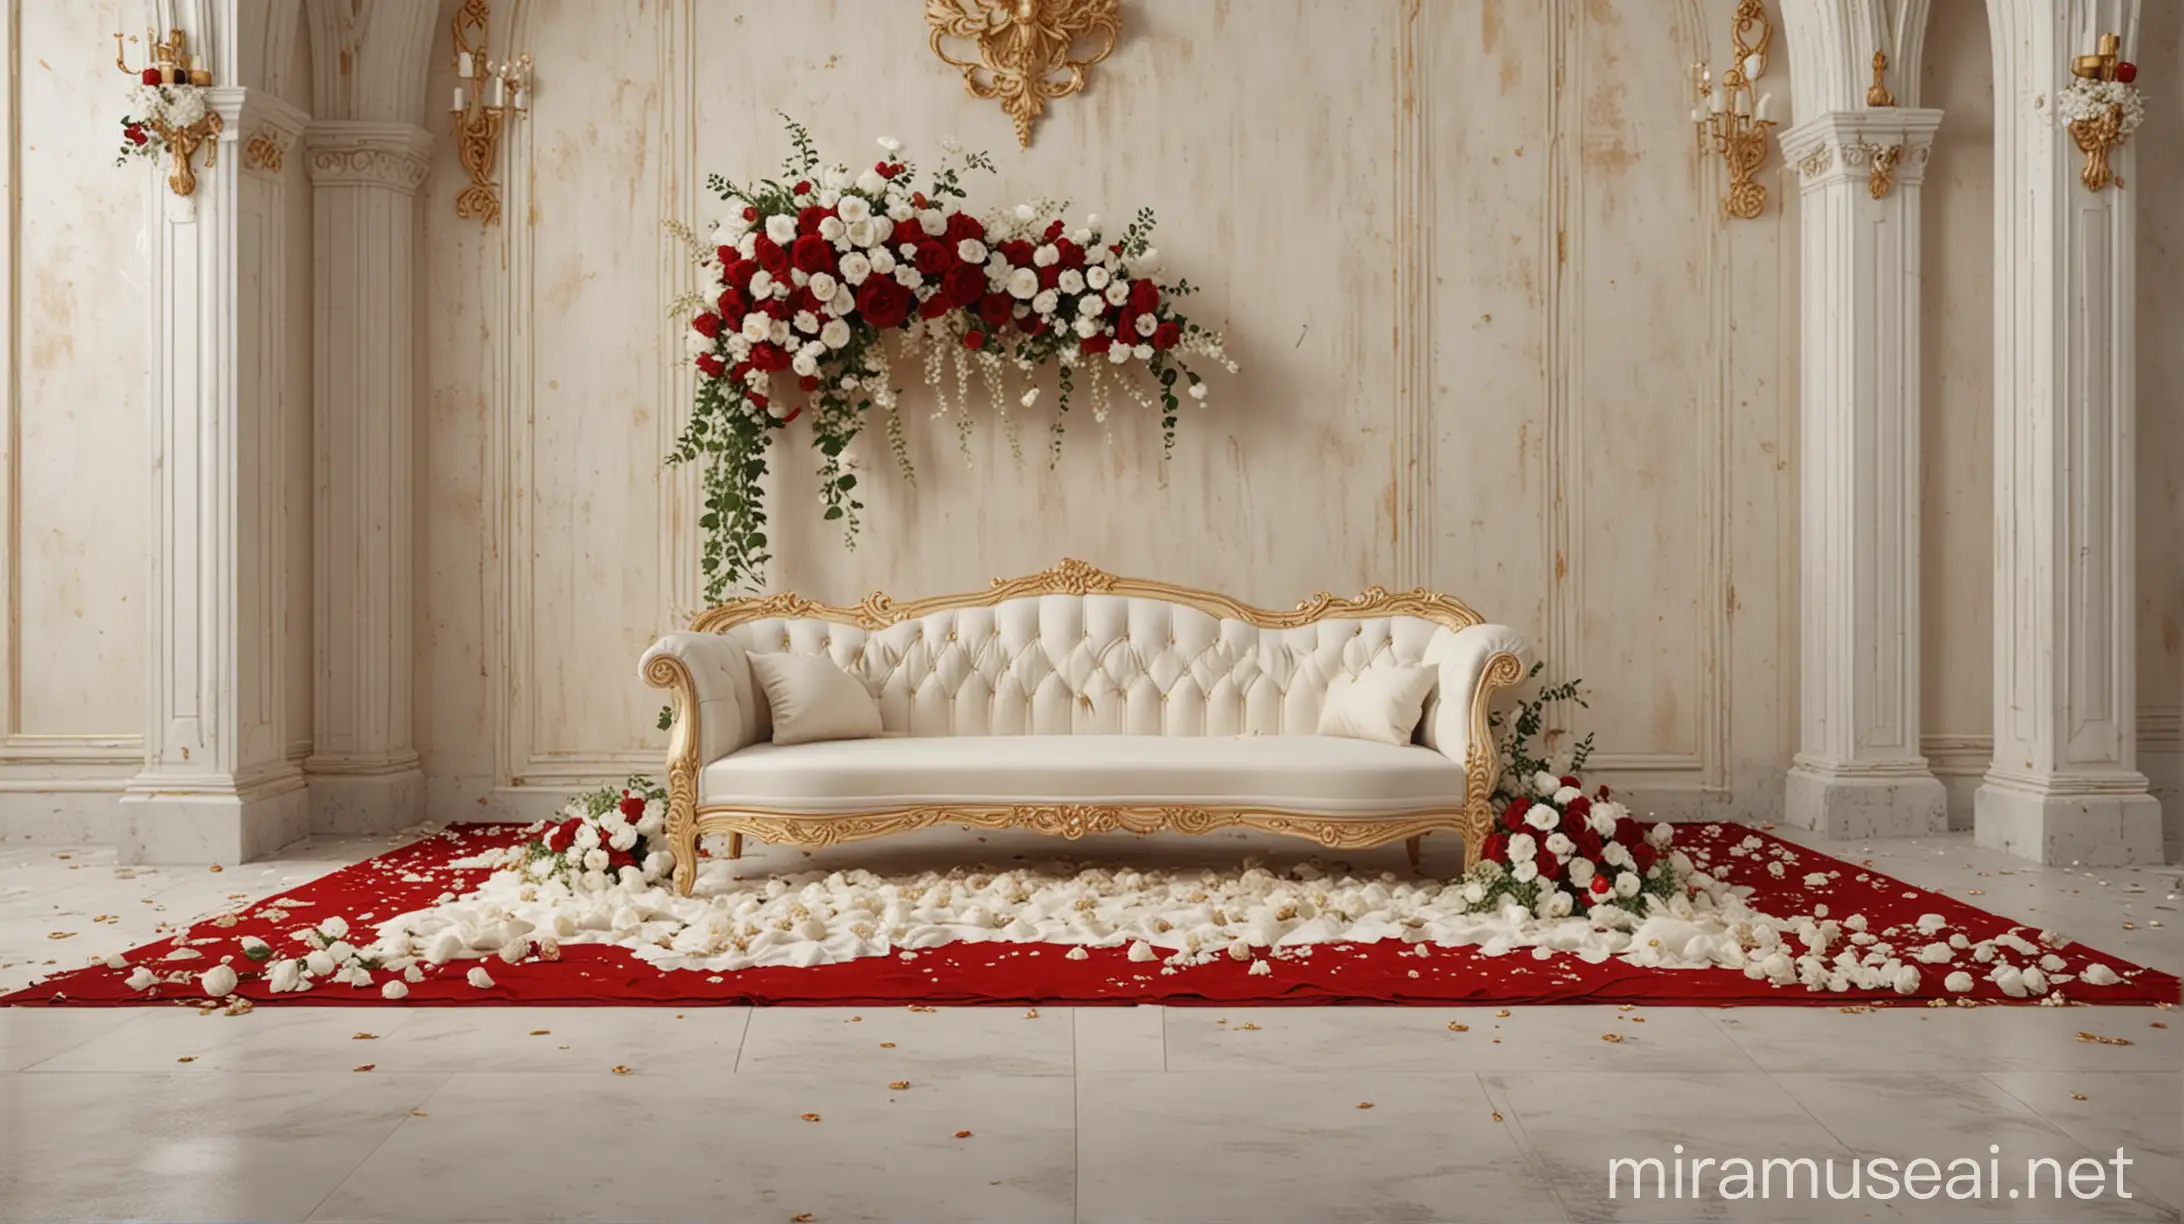 Luxury Gothic Wedding Setting with Cream White and Red Accents